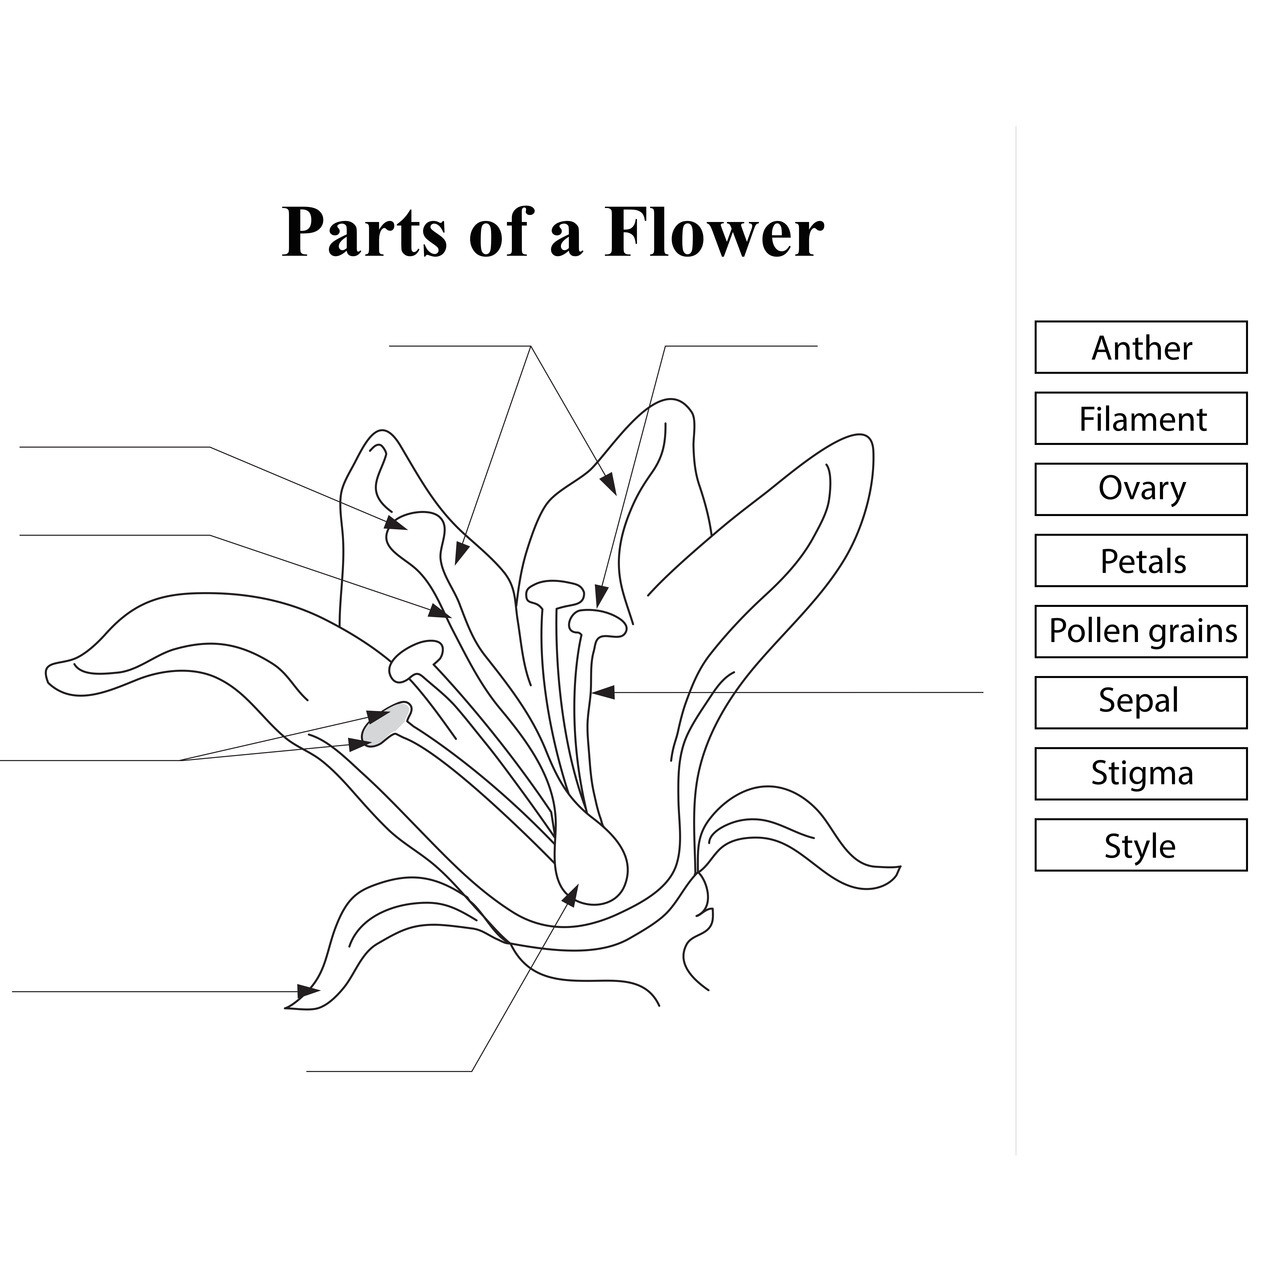 Worksheet On Parts Of A Flower Heat exchanger spare parts